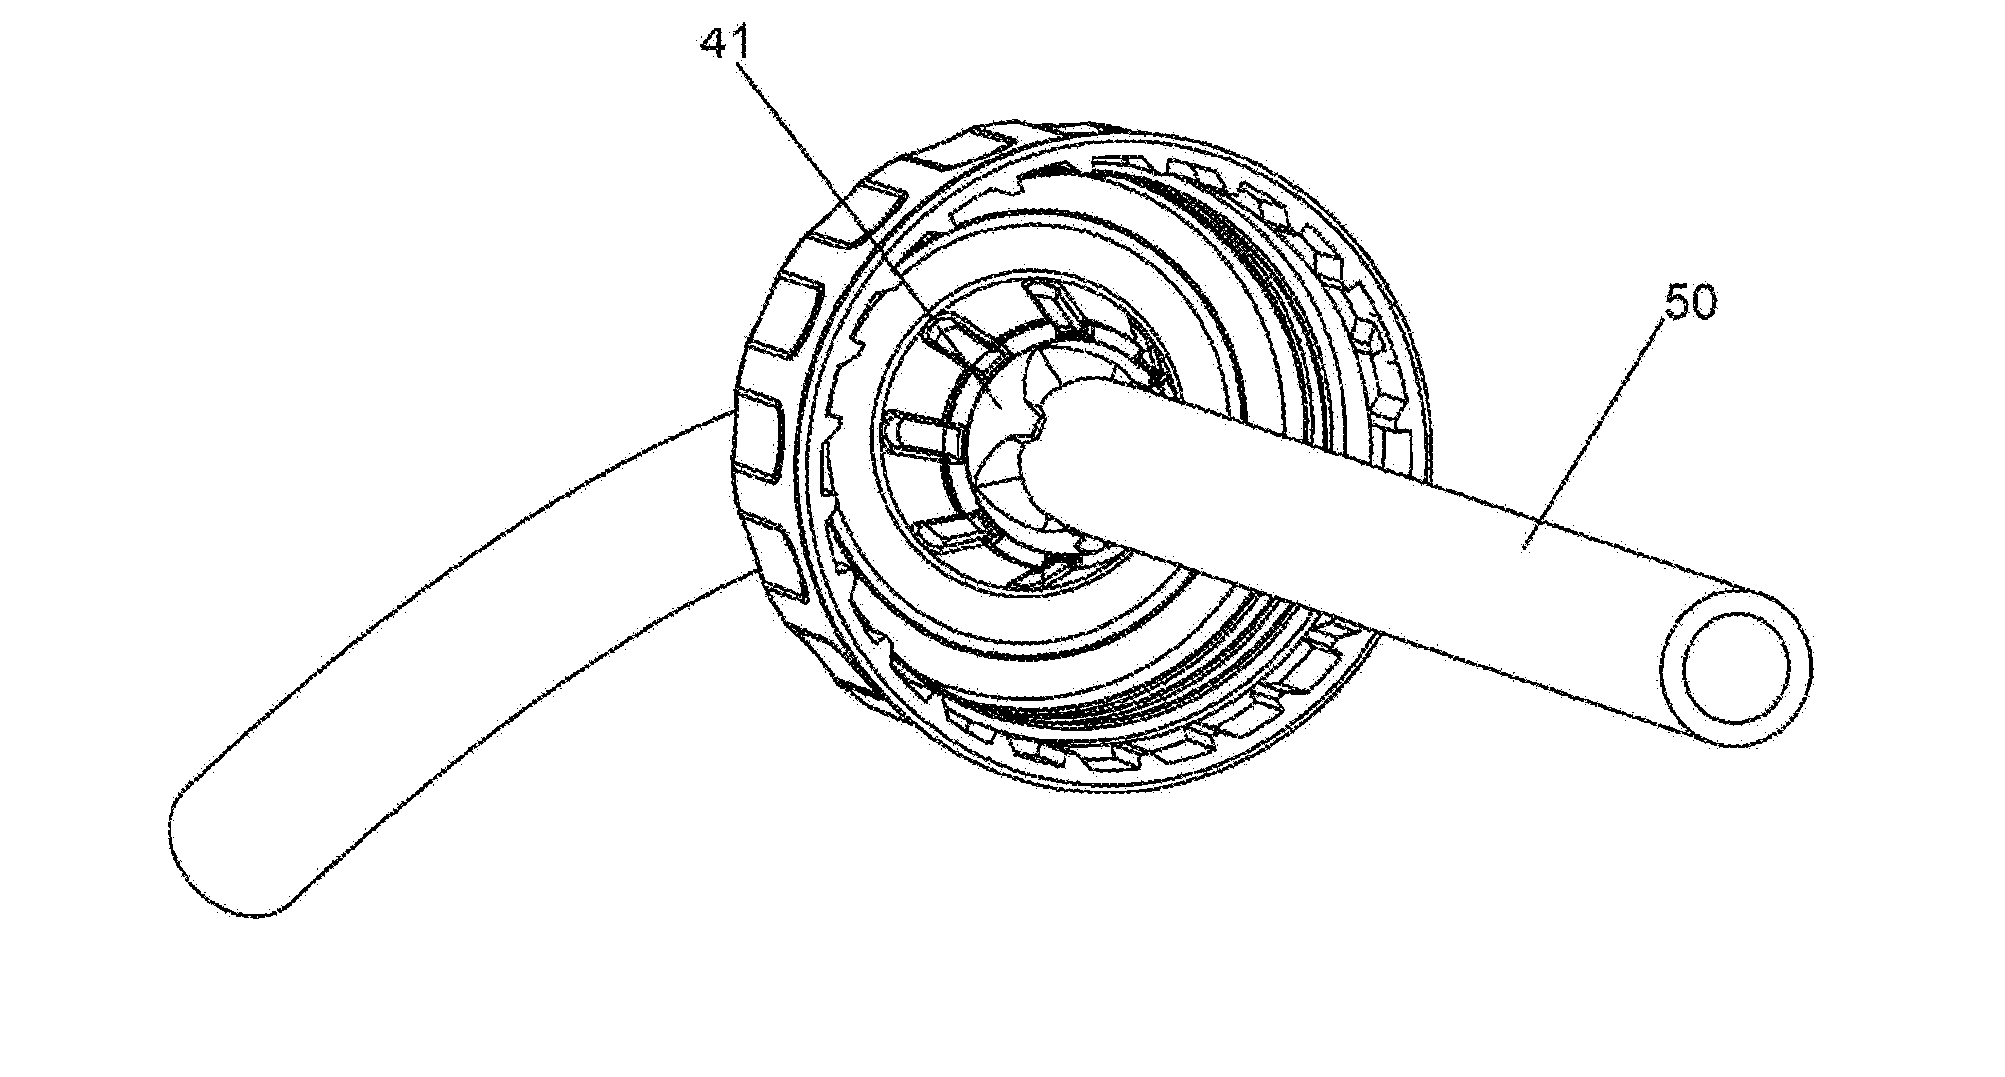 Container with irremovable closure to facilitate dispensation of contents